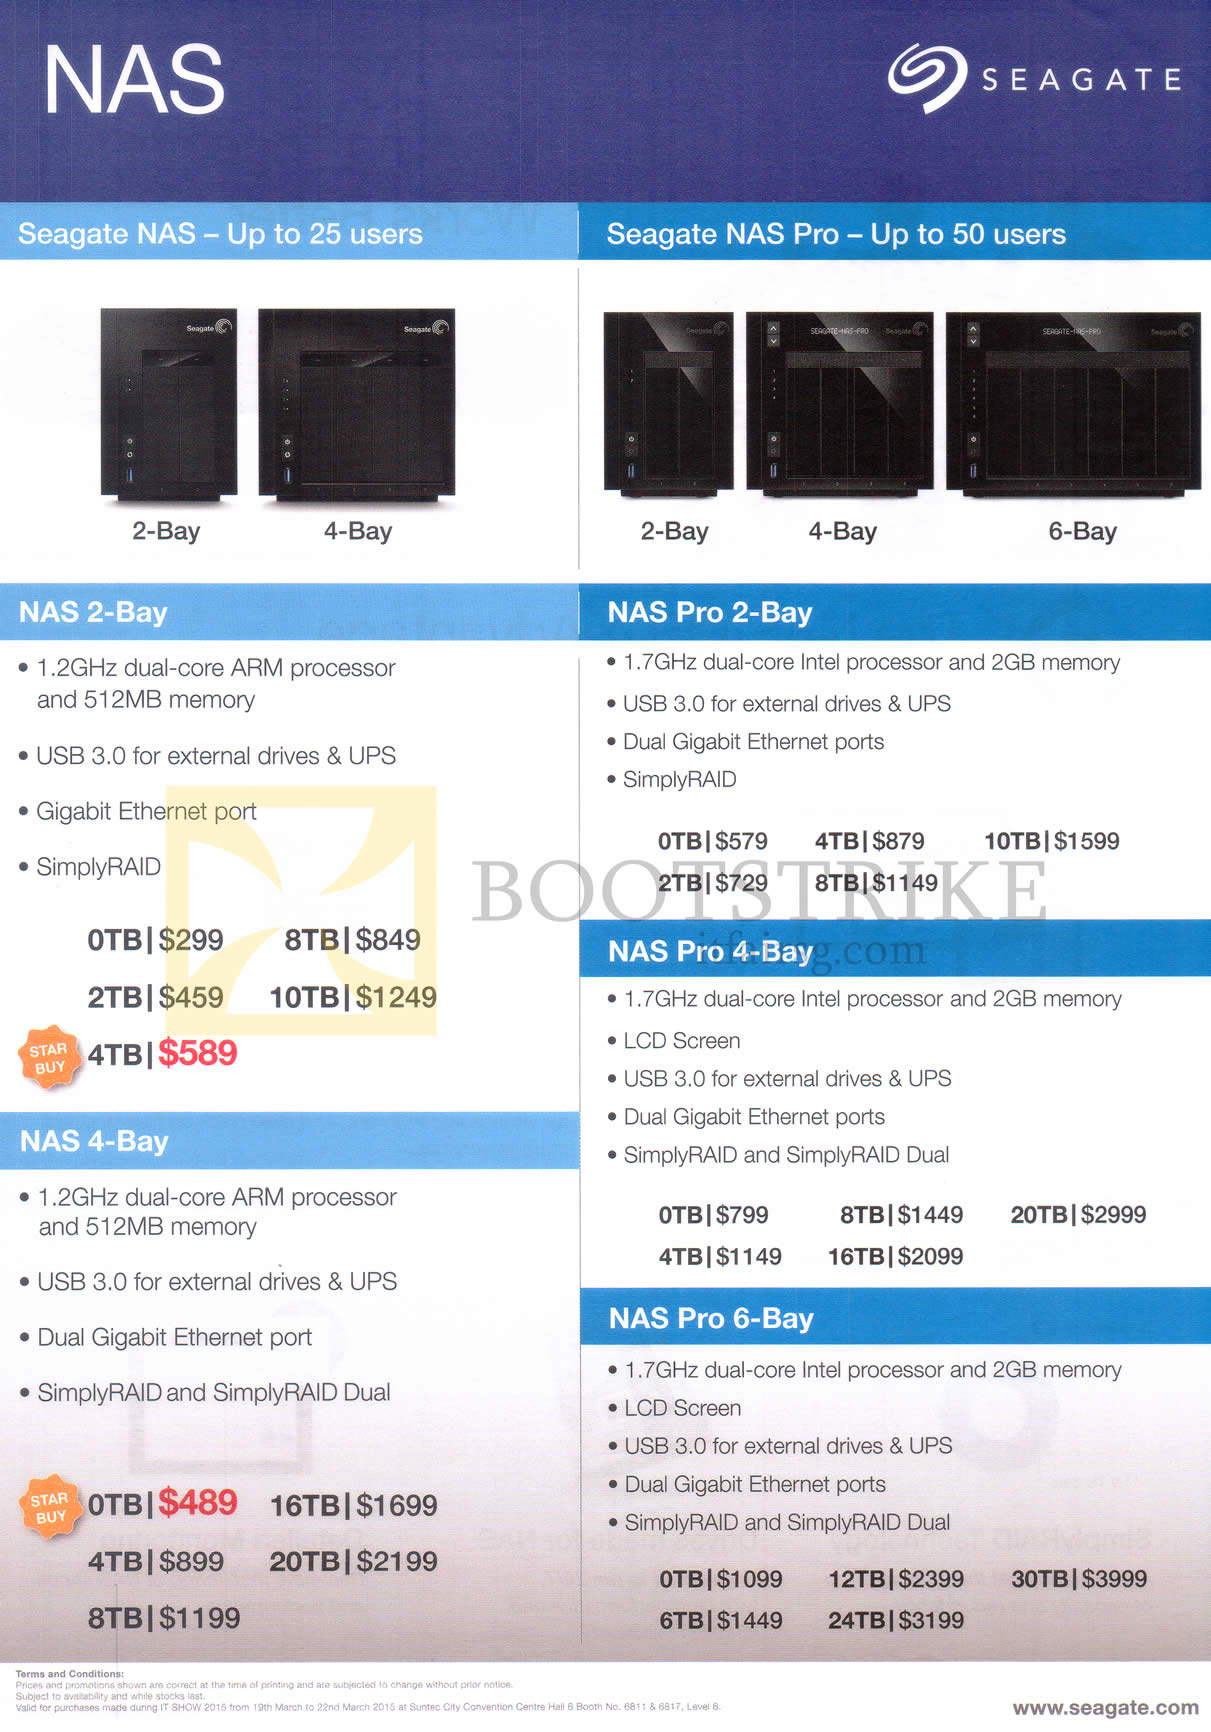 IT SHOW 2015 price list image brochure of Seagate NAS, Pro, 2 Bay, 4 Bay, 6 Bay 2TB 4TB 8TB 10TB 16TB 20TB 30TB